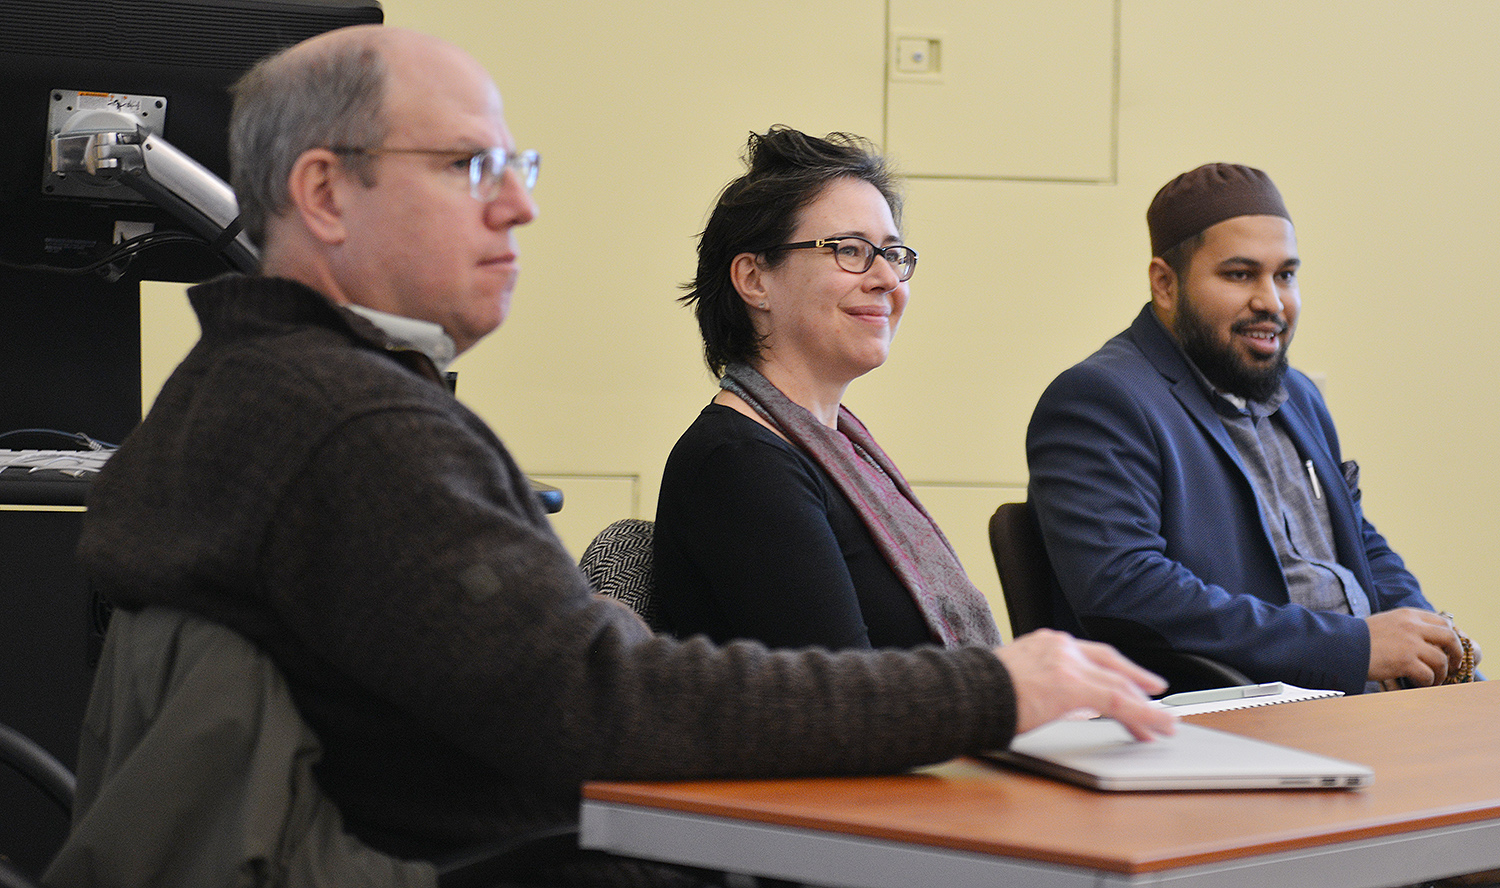 The Wesleyan Refugee Project hosted a faculty panel on "Islamophobia in the Age of Trump" Dec. 7.